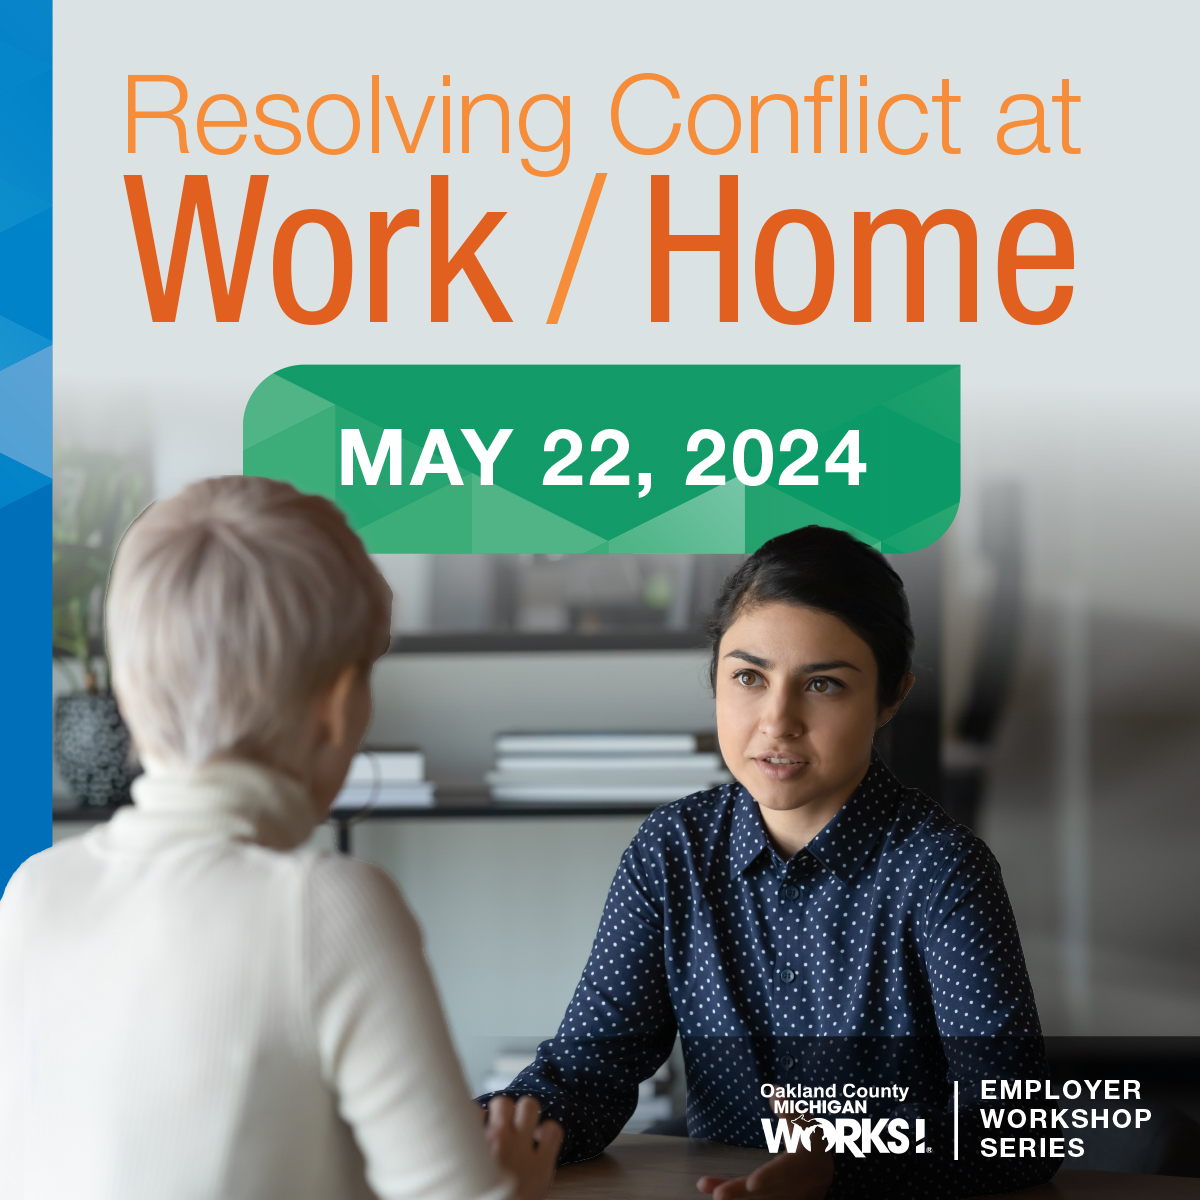 This month, #OaklandCounty Michigan Works! invites local employers to join us for a free workshop on resolving conflict at home and in the workplace. Stop by @OCCollege on May 22 for help resolving workplace disagreements from an expert. RSVP at bit.ly/436hLT6.